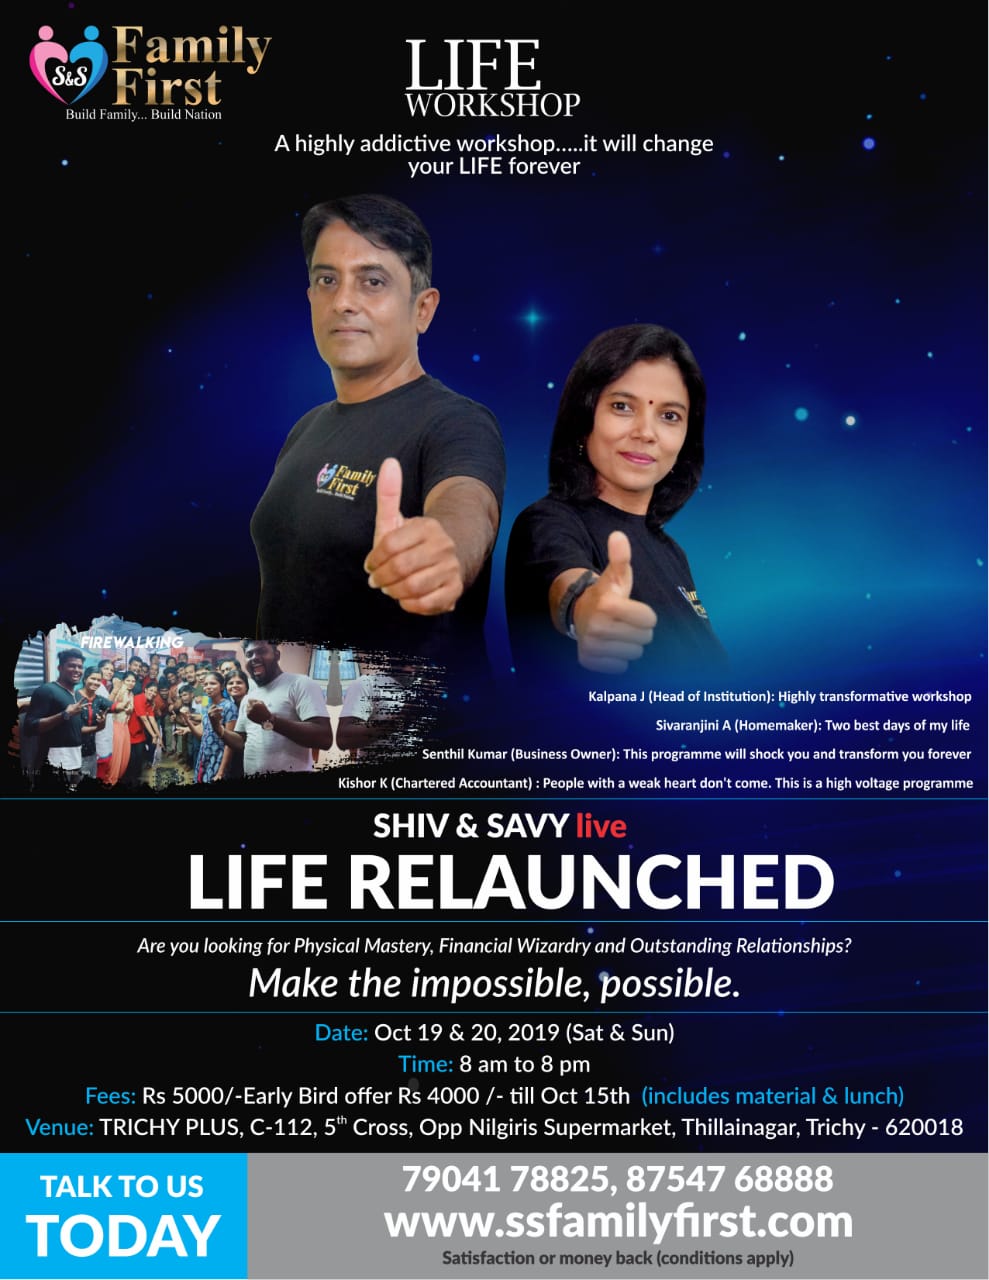 Life Relaunched Workshop